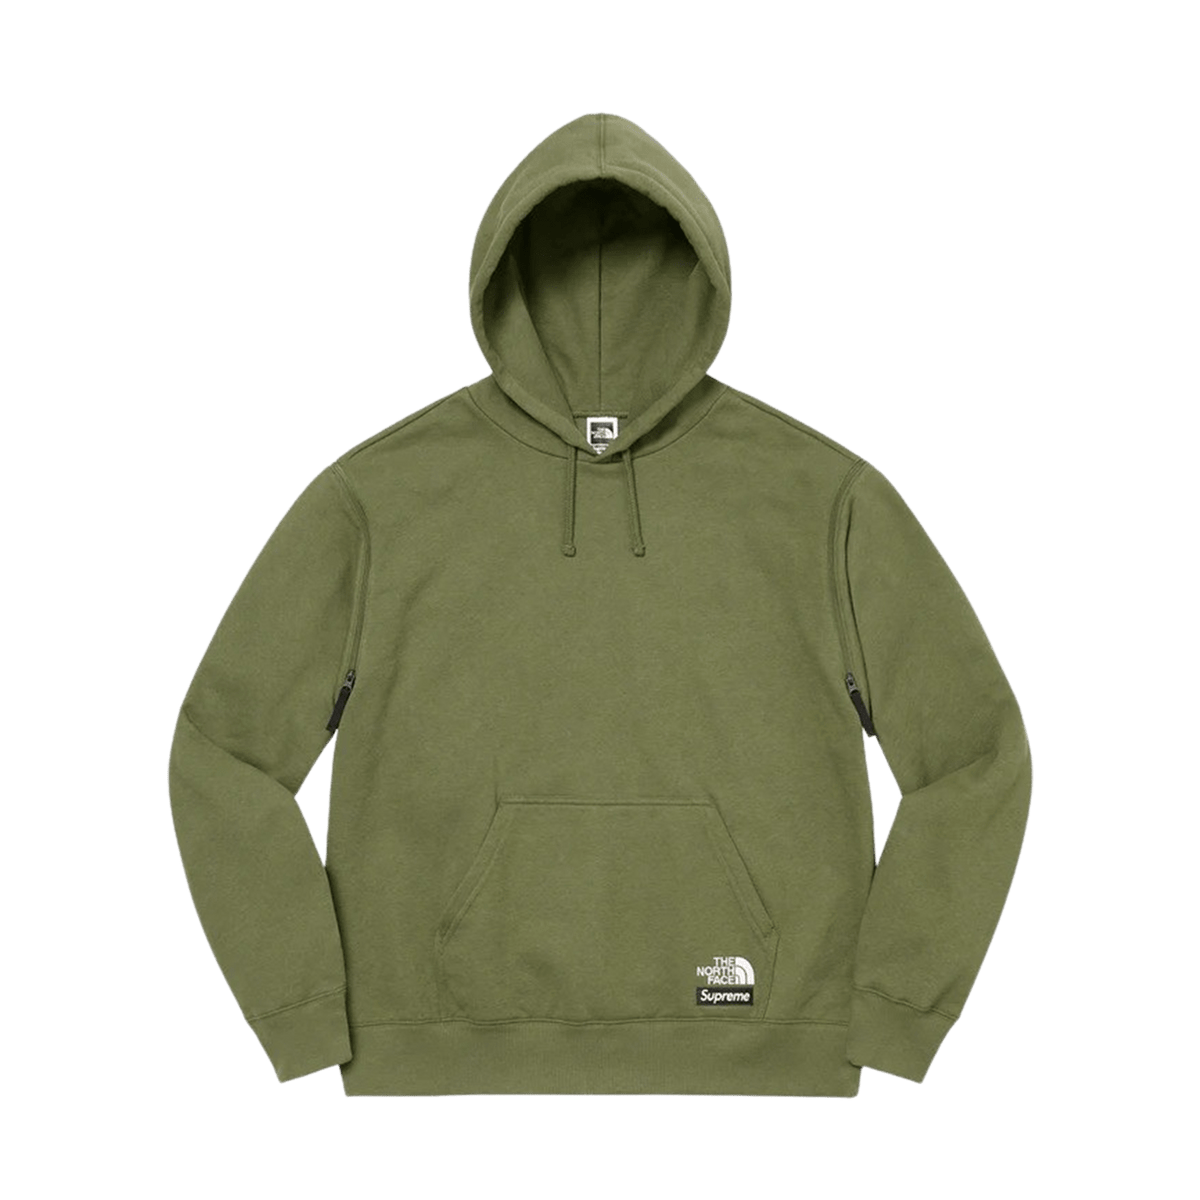 Supreme x The North Face Convertible Hooded Sweatshirt 'Olive' - Kick Game